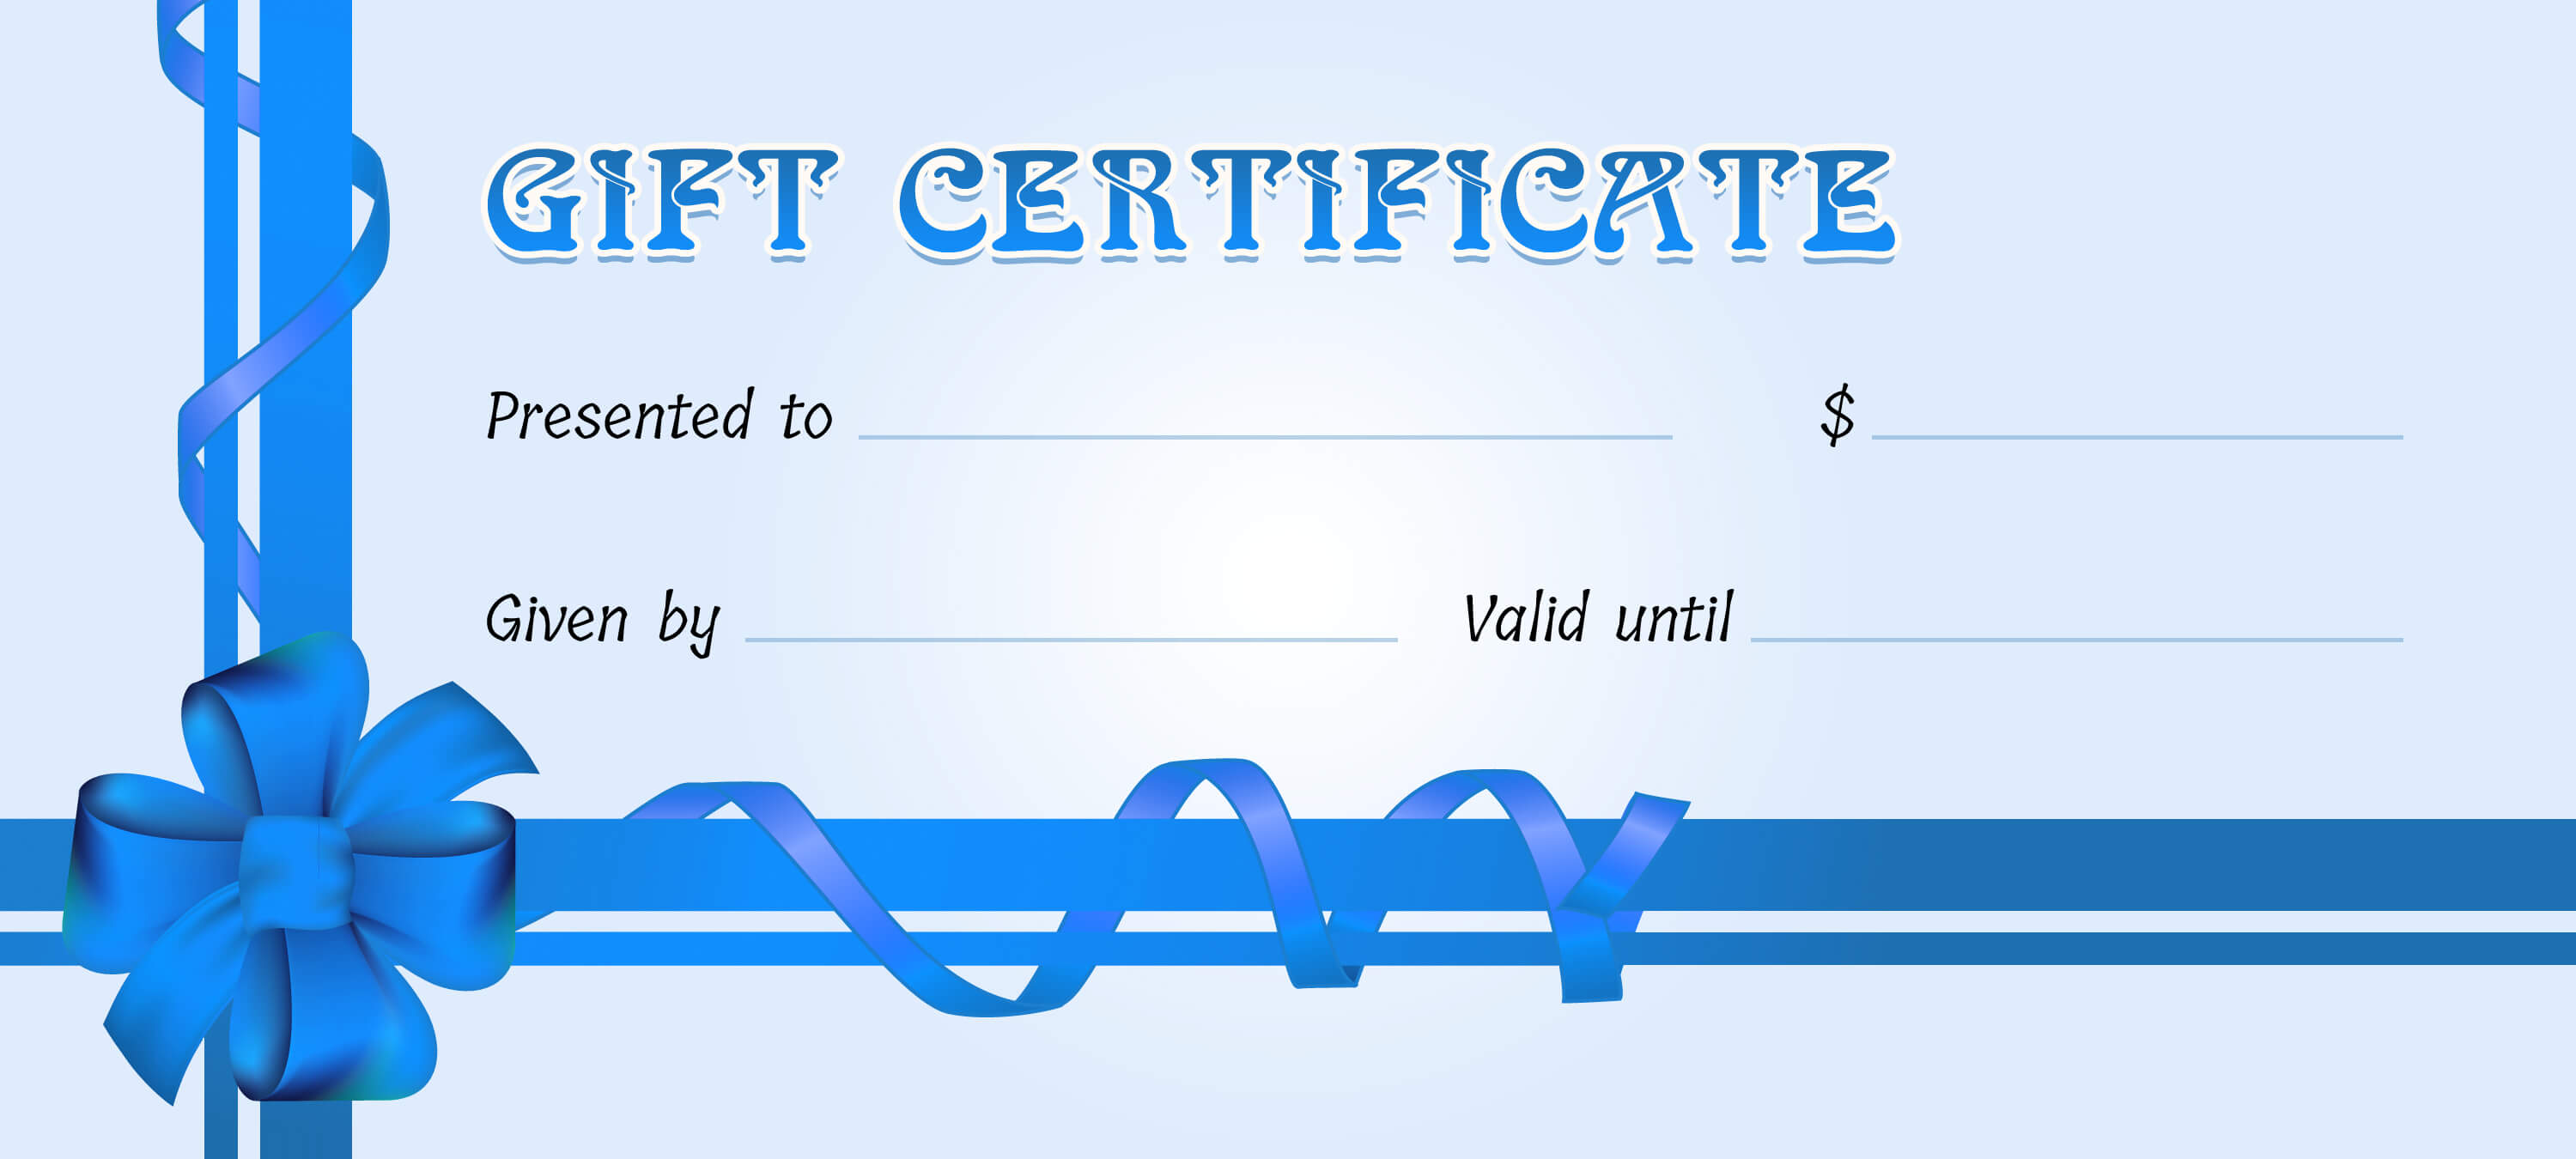 Certificates Templates For Word Gift Certificate 2007 Within Professional Certificate Templates For Word